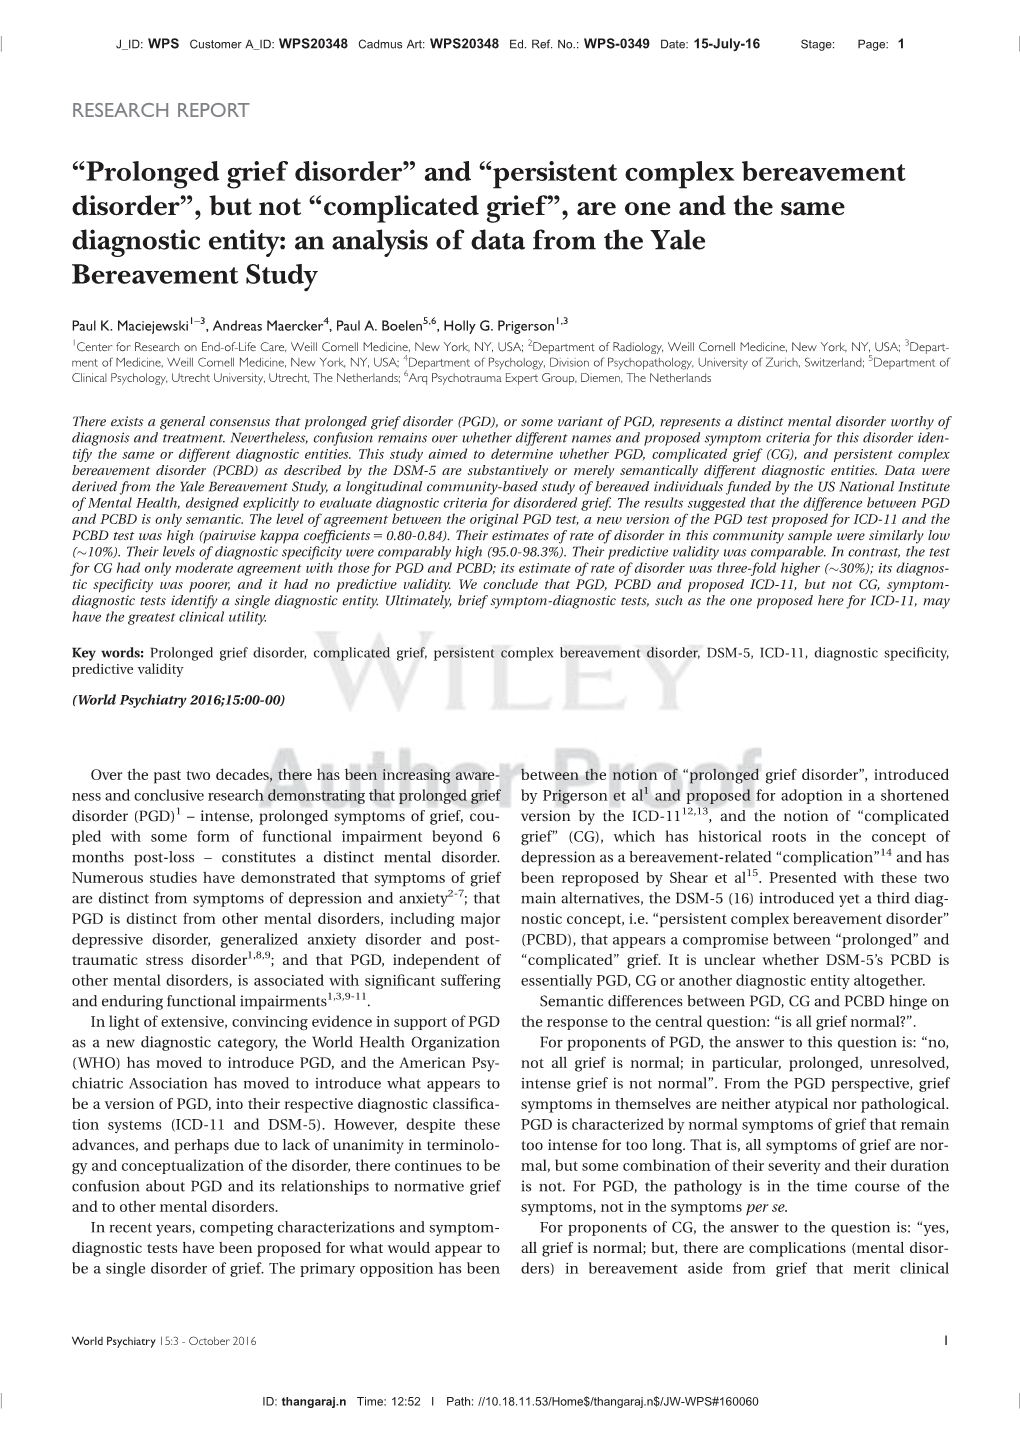 “Persistent Complex Bereavement Disorder”, but Not “Complicated Grief”, Are One and the Same Diagnostic Entity: an Analysis of Data from the Yale Bereavement Study